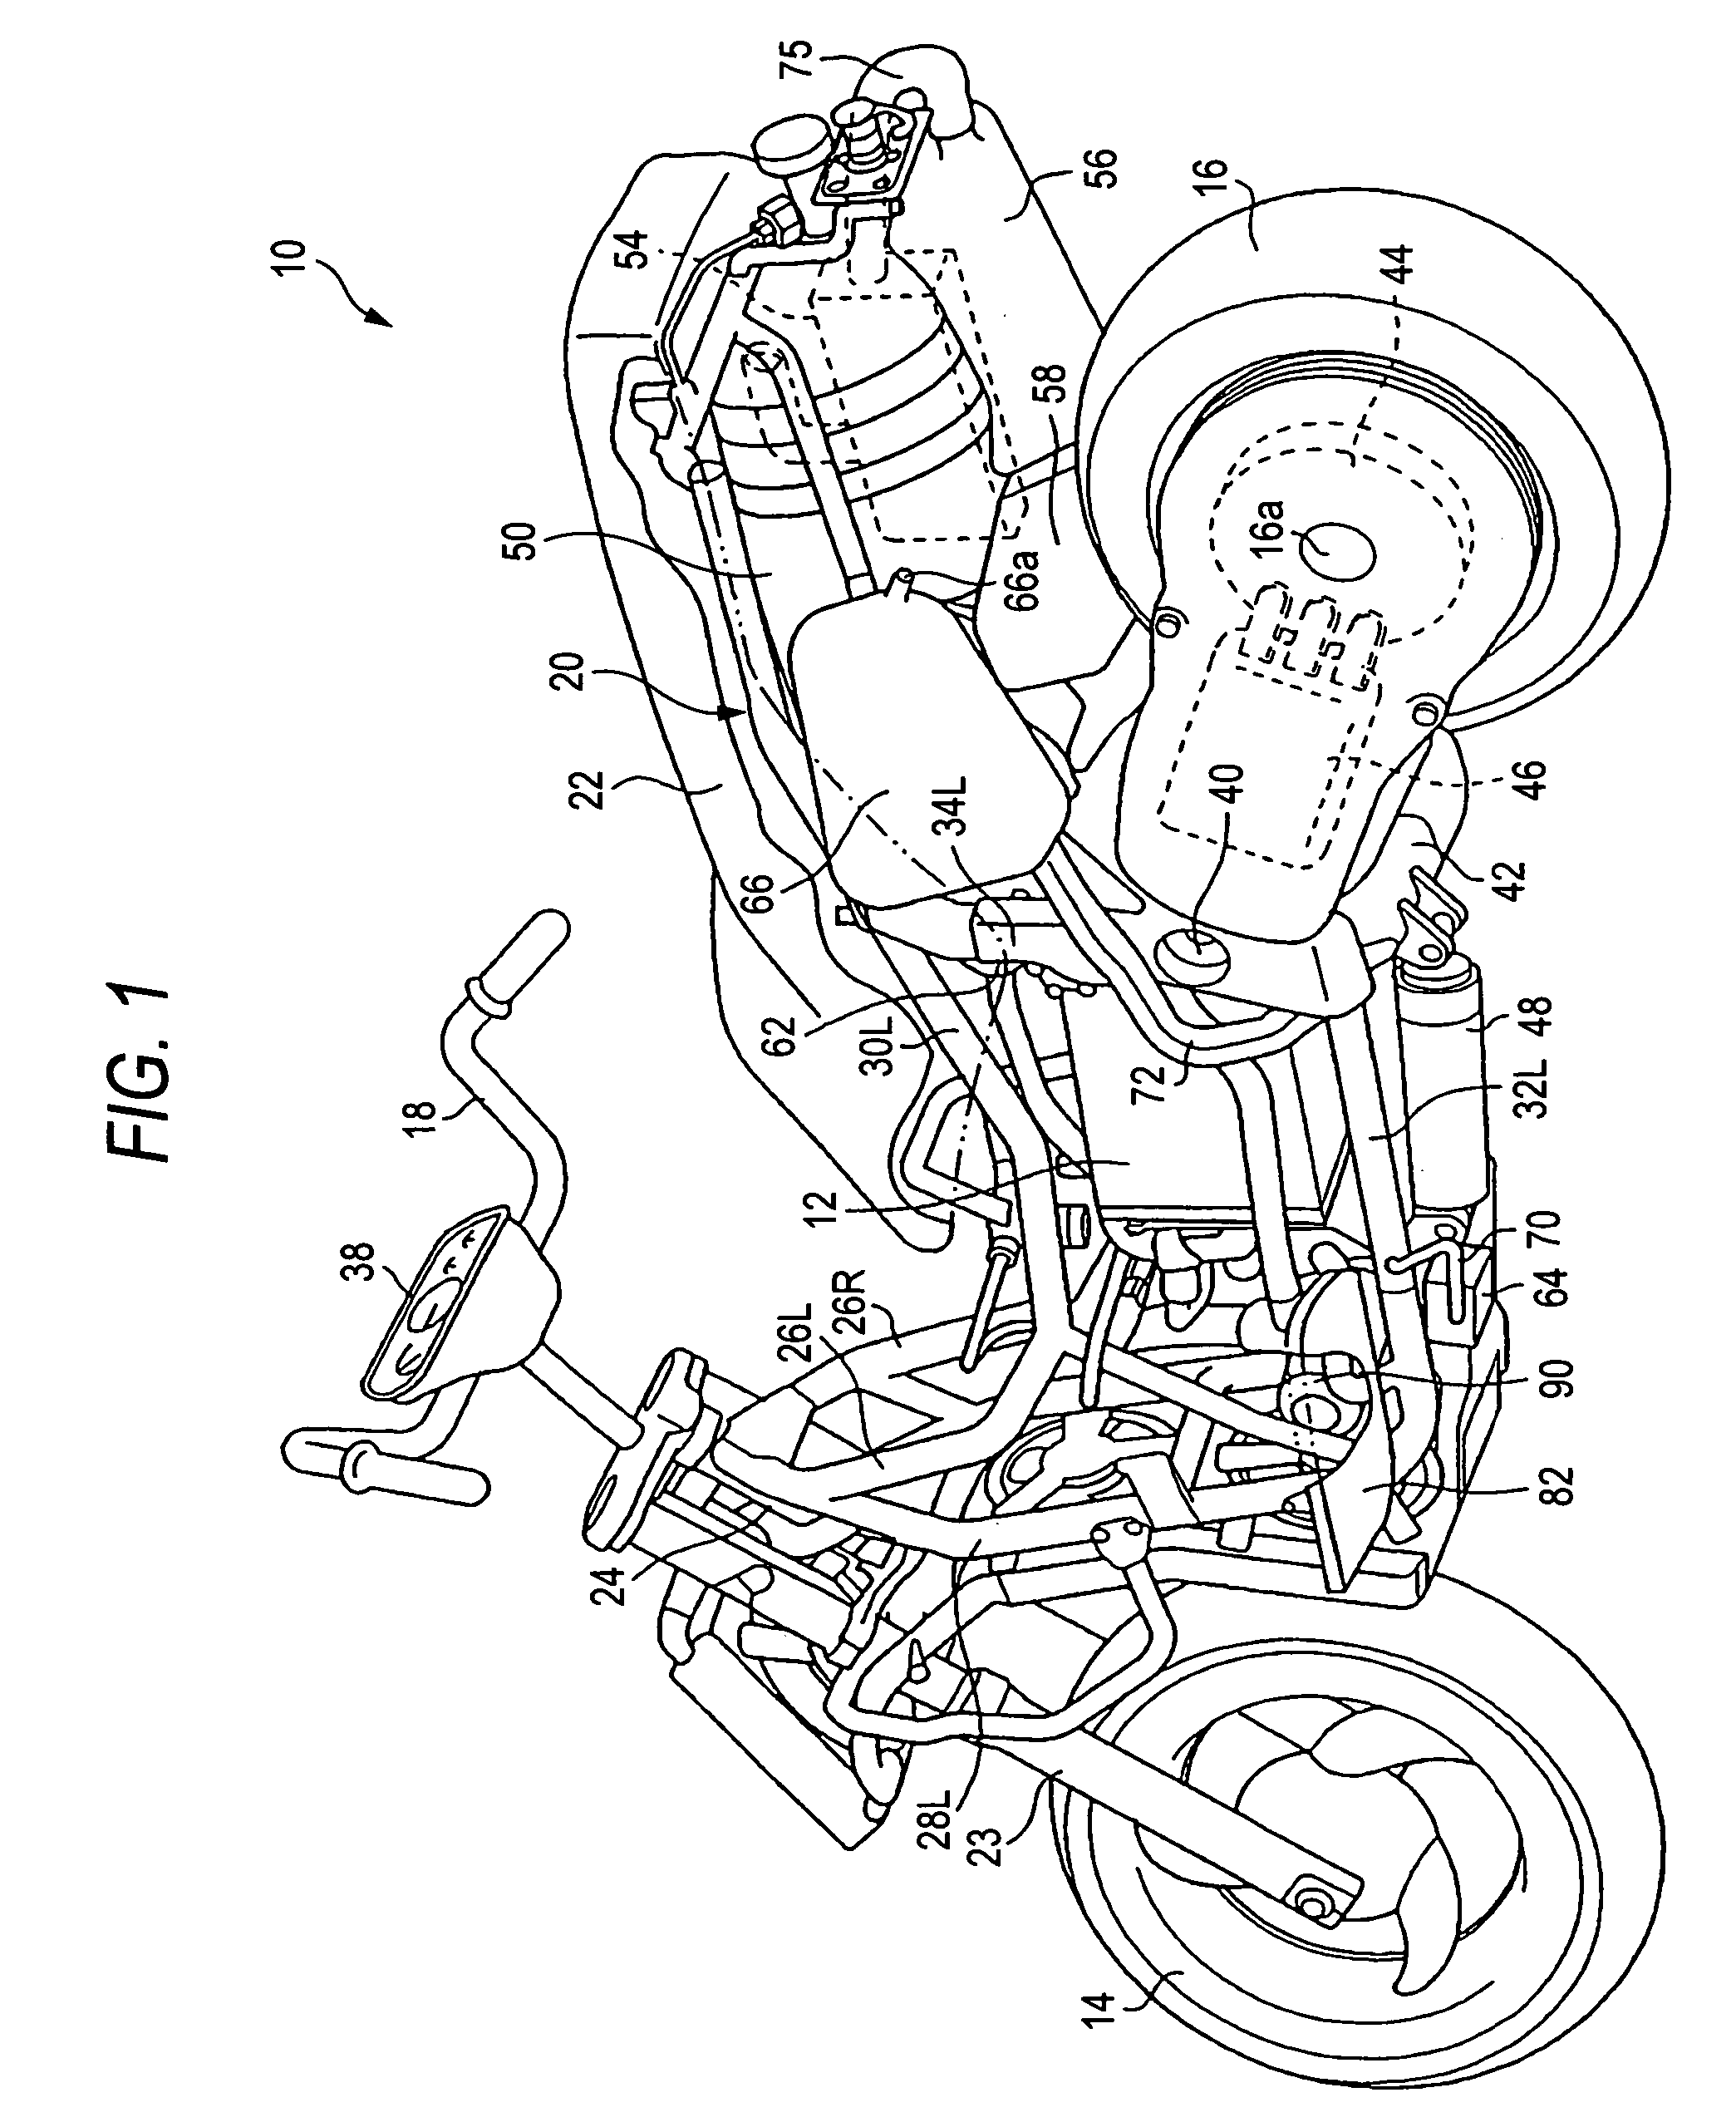 Motor cycle with fuel cell and stack structure of fuel cell